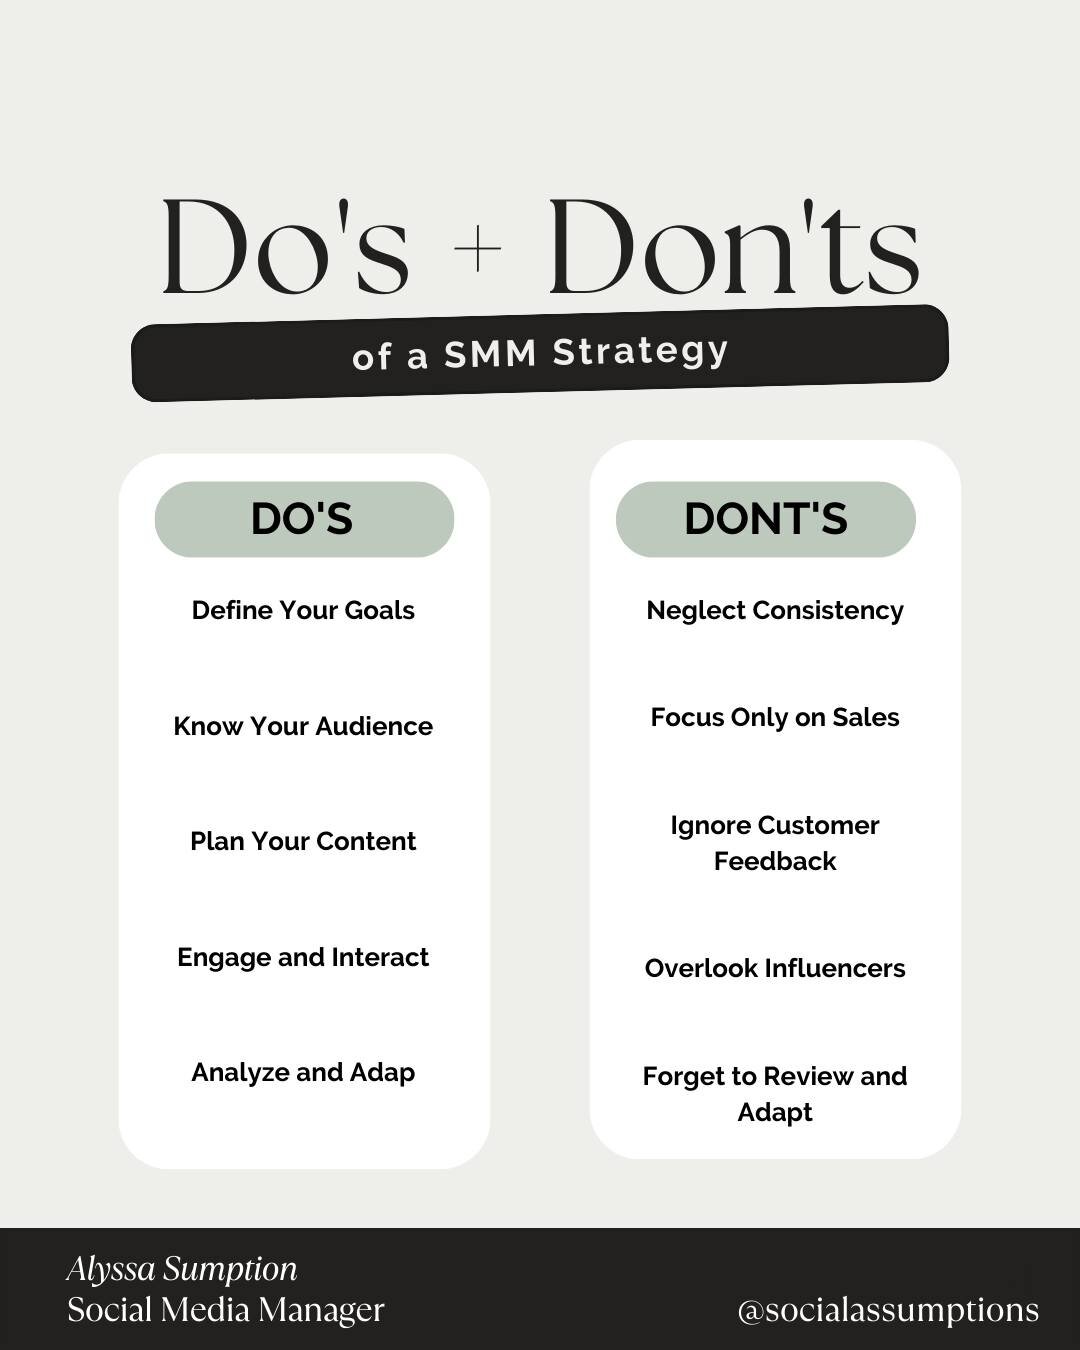 Are you tired of not getting the results you want from your social media presence? 

As a social media manager, I've seen it all. Here are some essential do's and don'ts to make sure you're getting the most out of your SMM strategy.

Remember, a stro